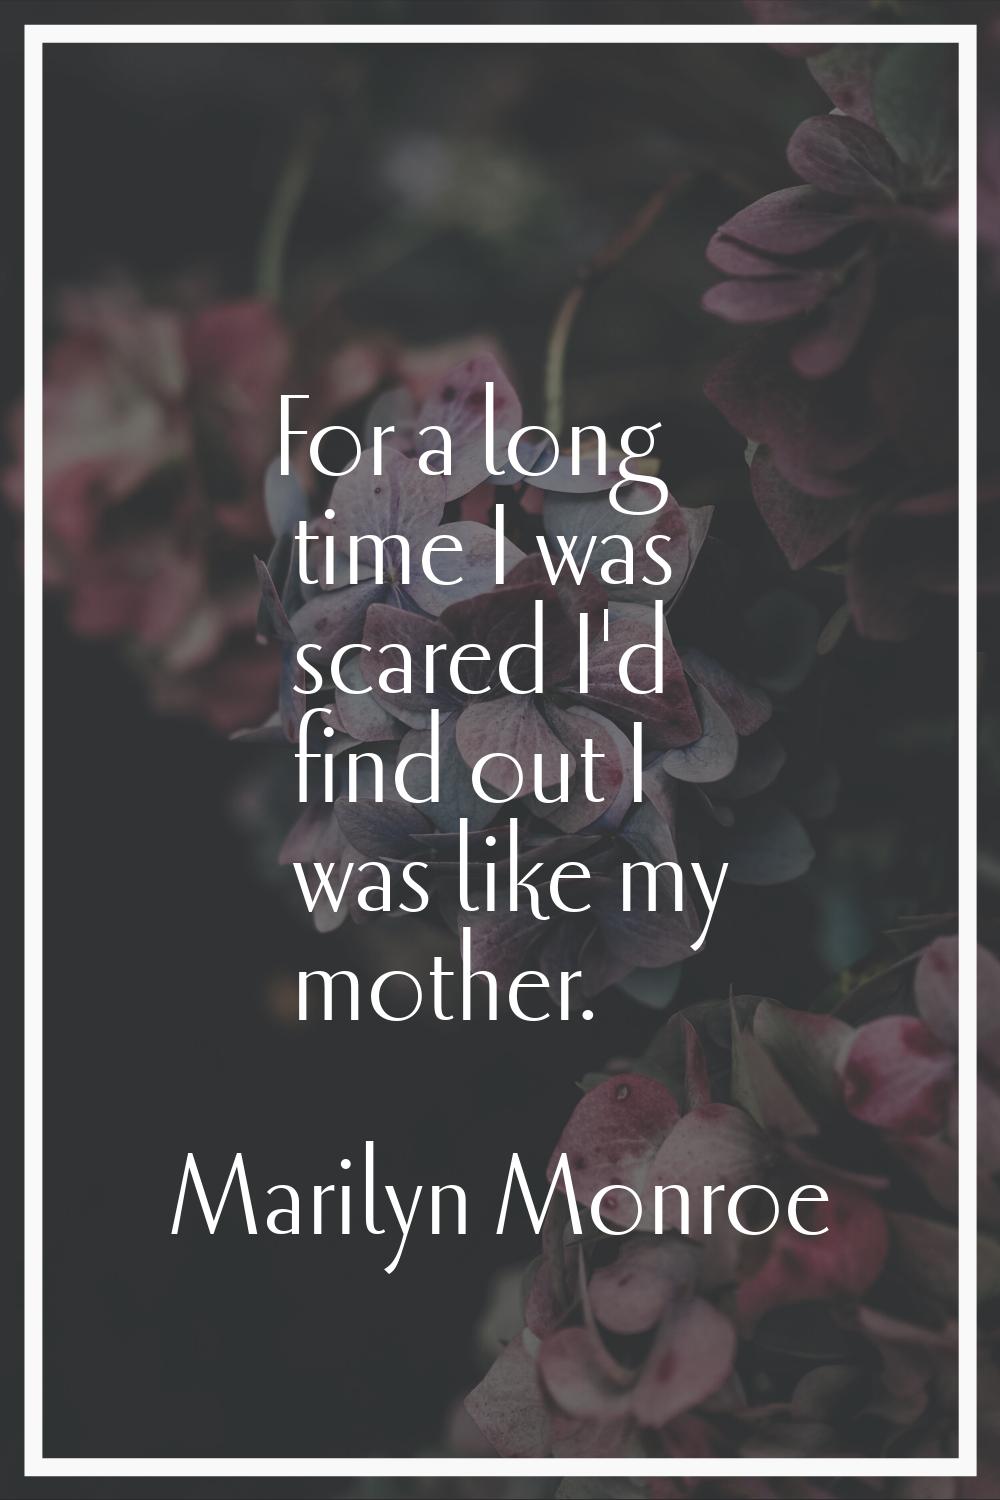 For a long time I was scared I'd find out I was like my mother.